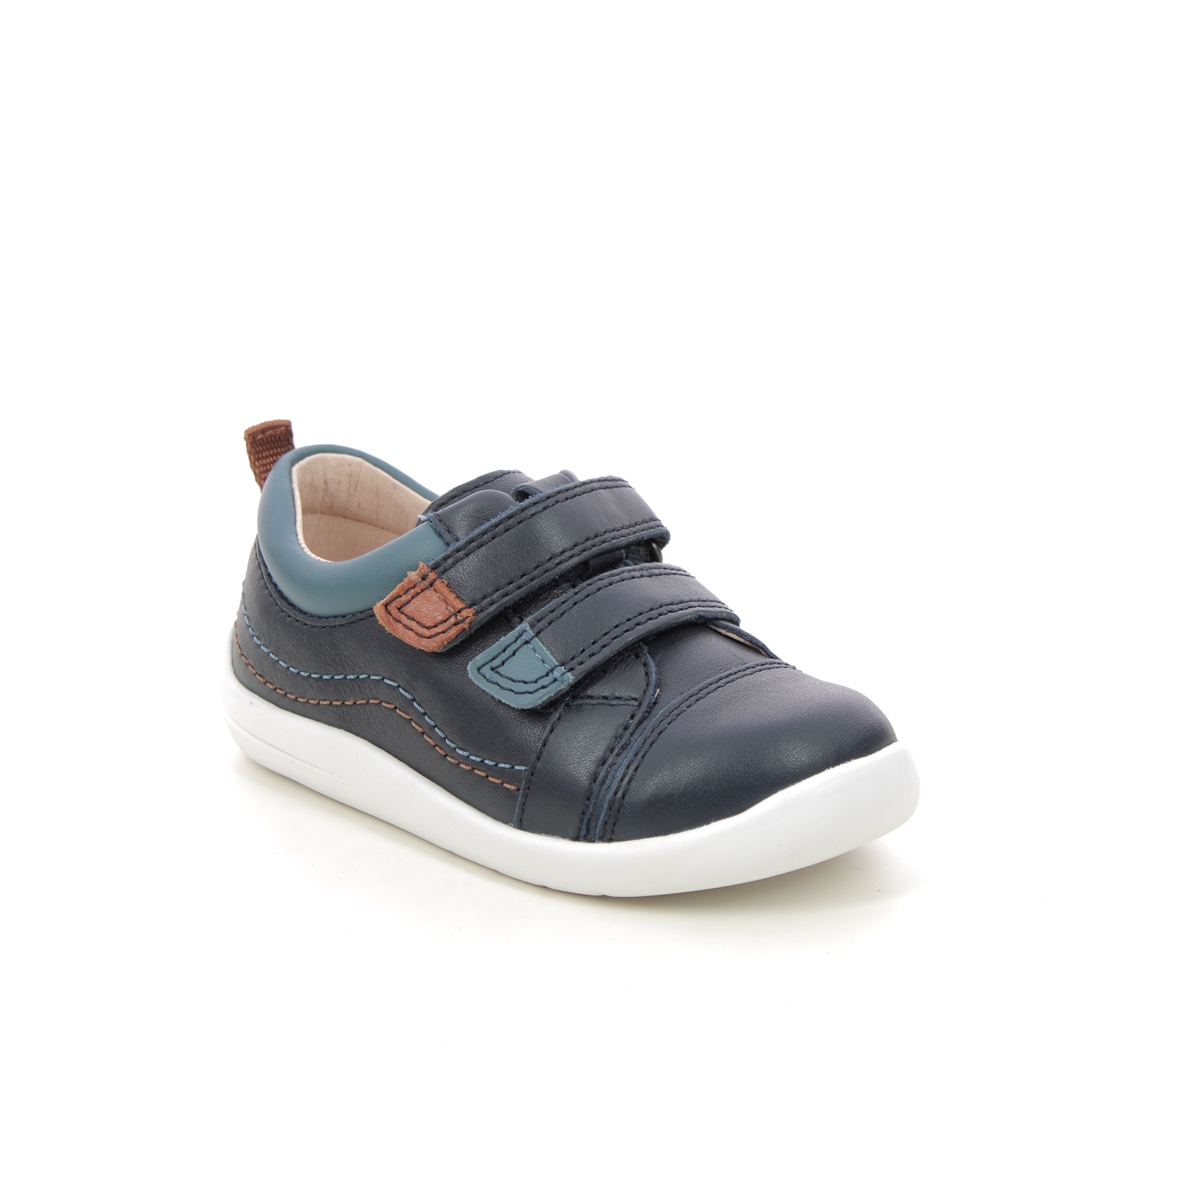 Start Rite - Clubhouse Jojo In Navy Leather 0800-96F In Size 8 In Plain Navy Leather Boys First And Toddler Shoes  In Navy Leather For kids